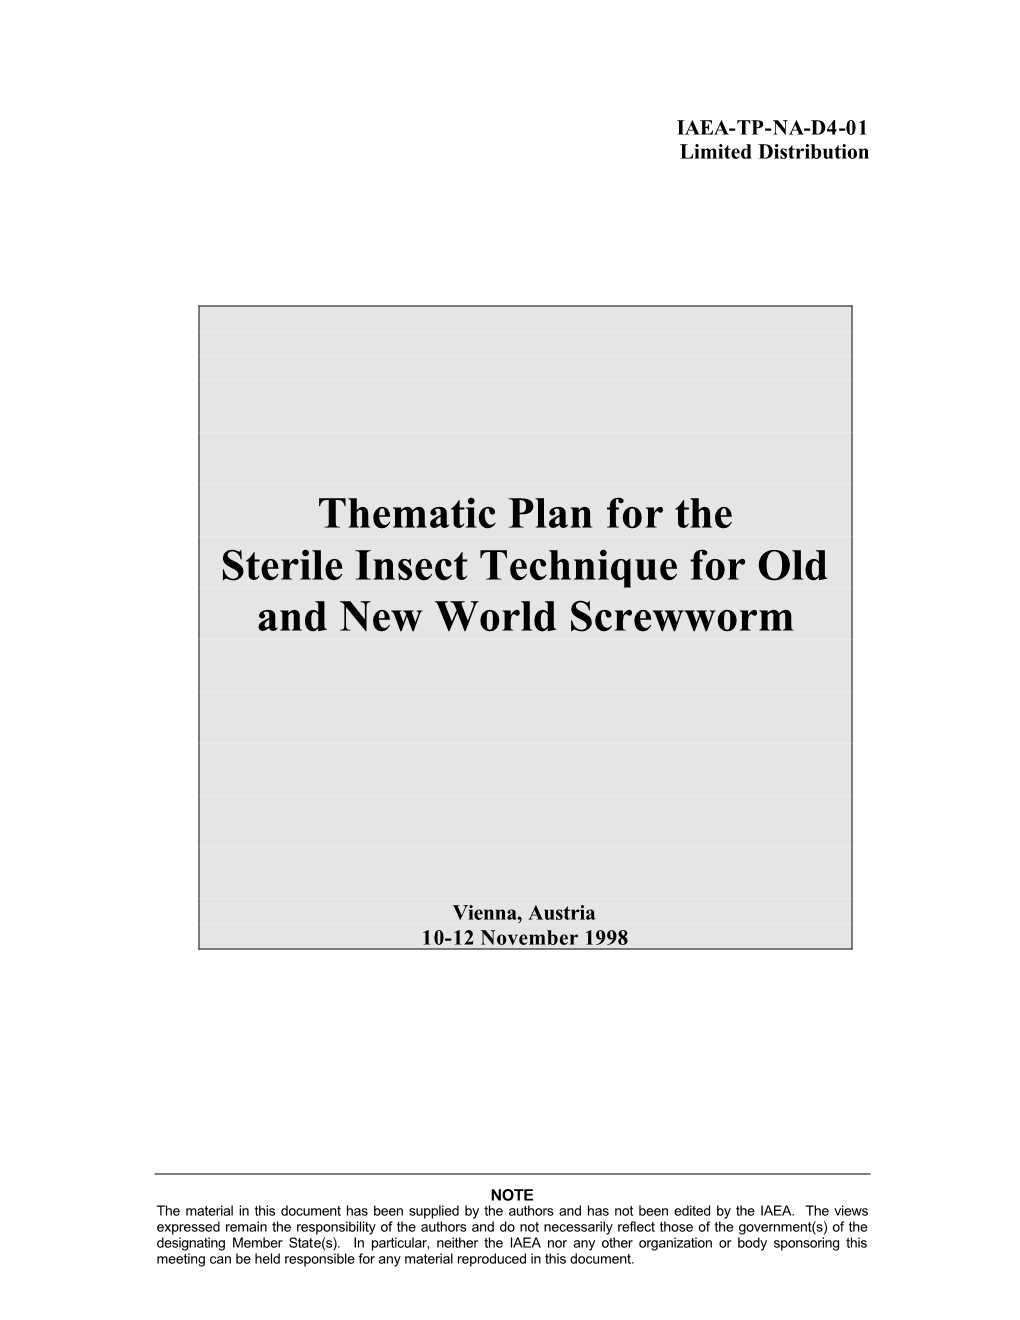 Thematic Plan for the Sterile Insect Technique for Old and New World Screwworm